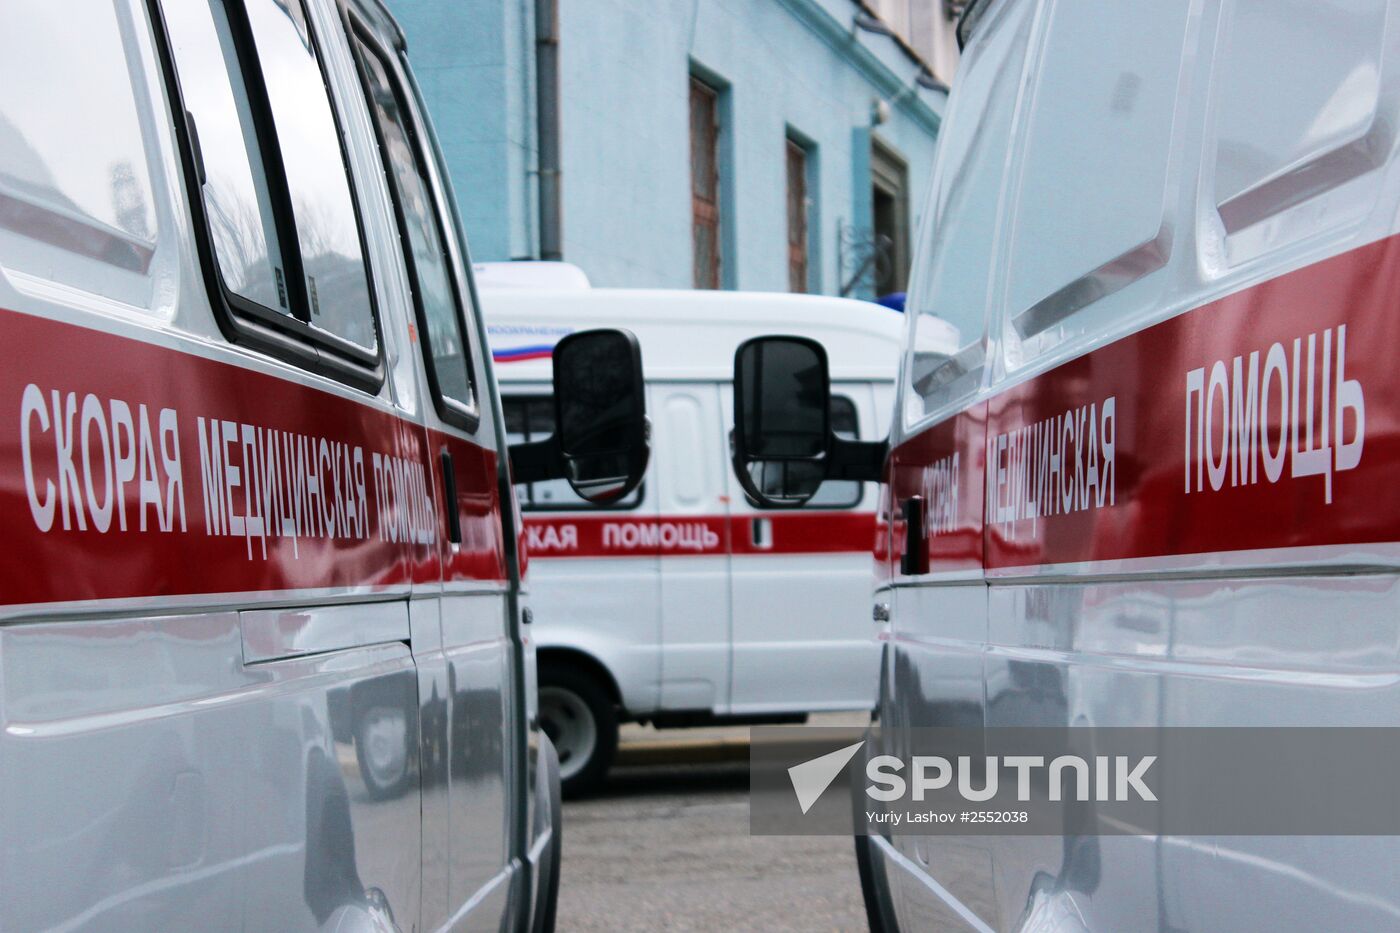 Russian Emergencies Minister Vladimir Puсhkov gives new equipment to Crimean rescuers